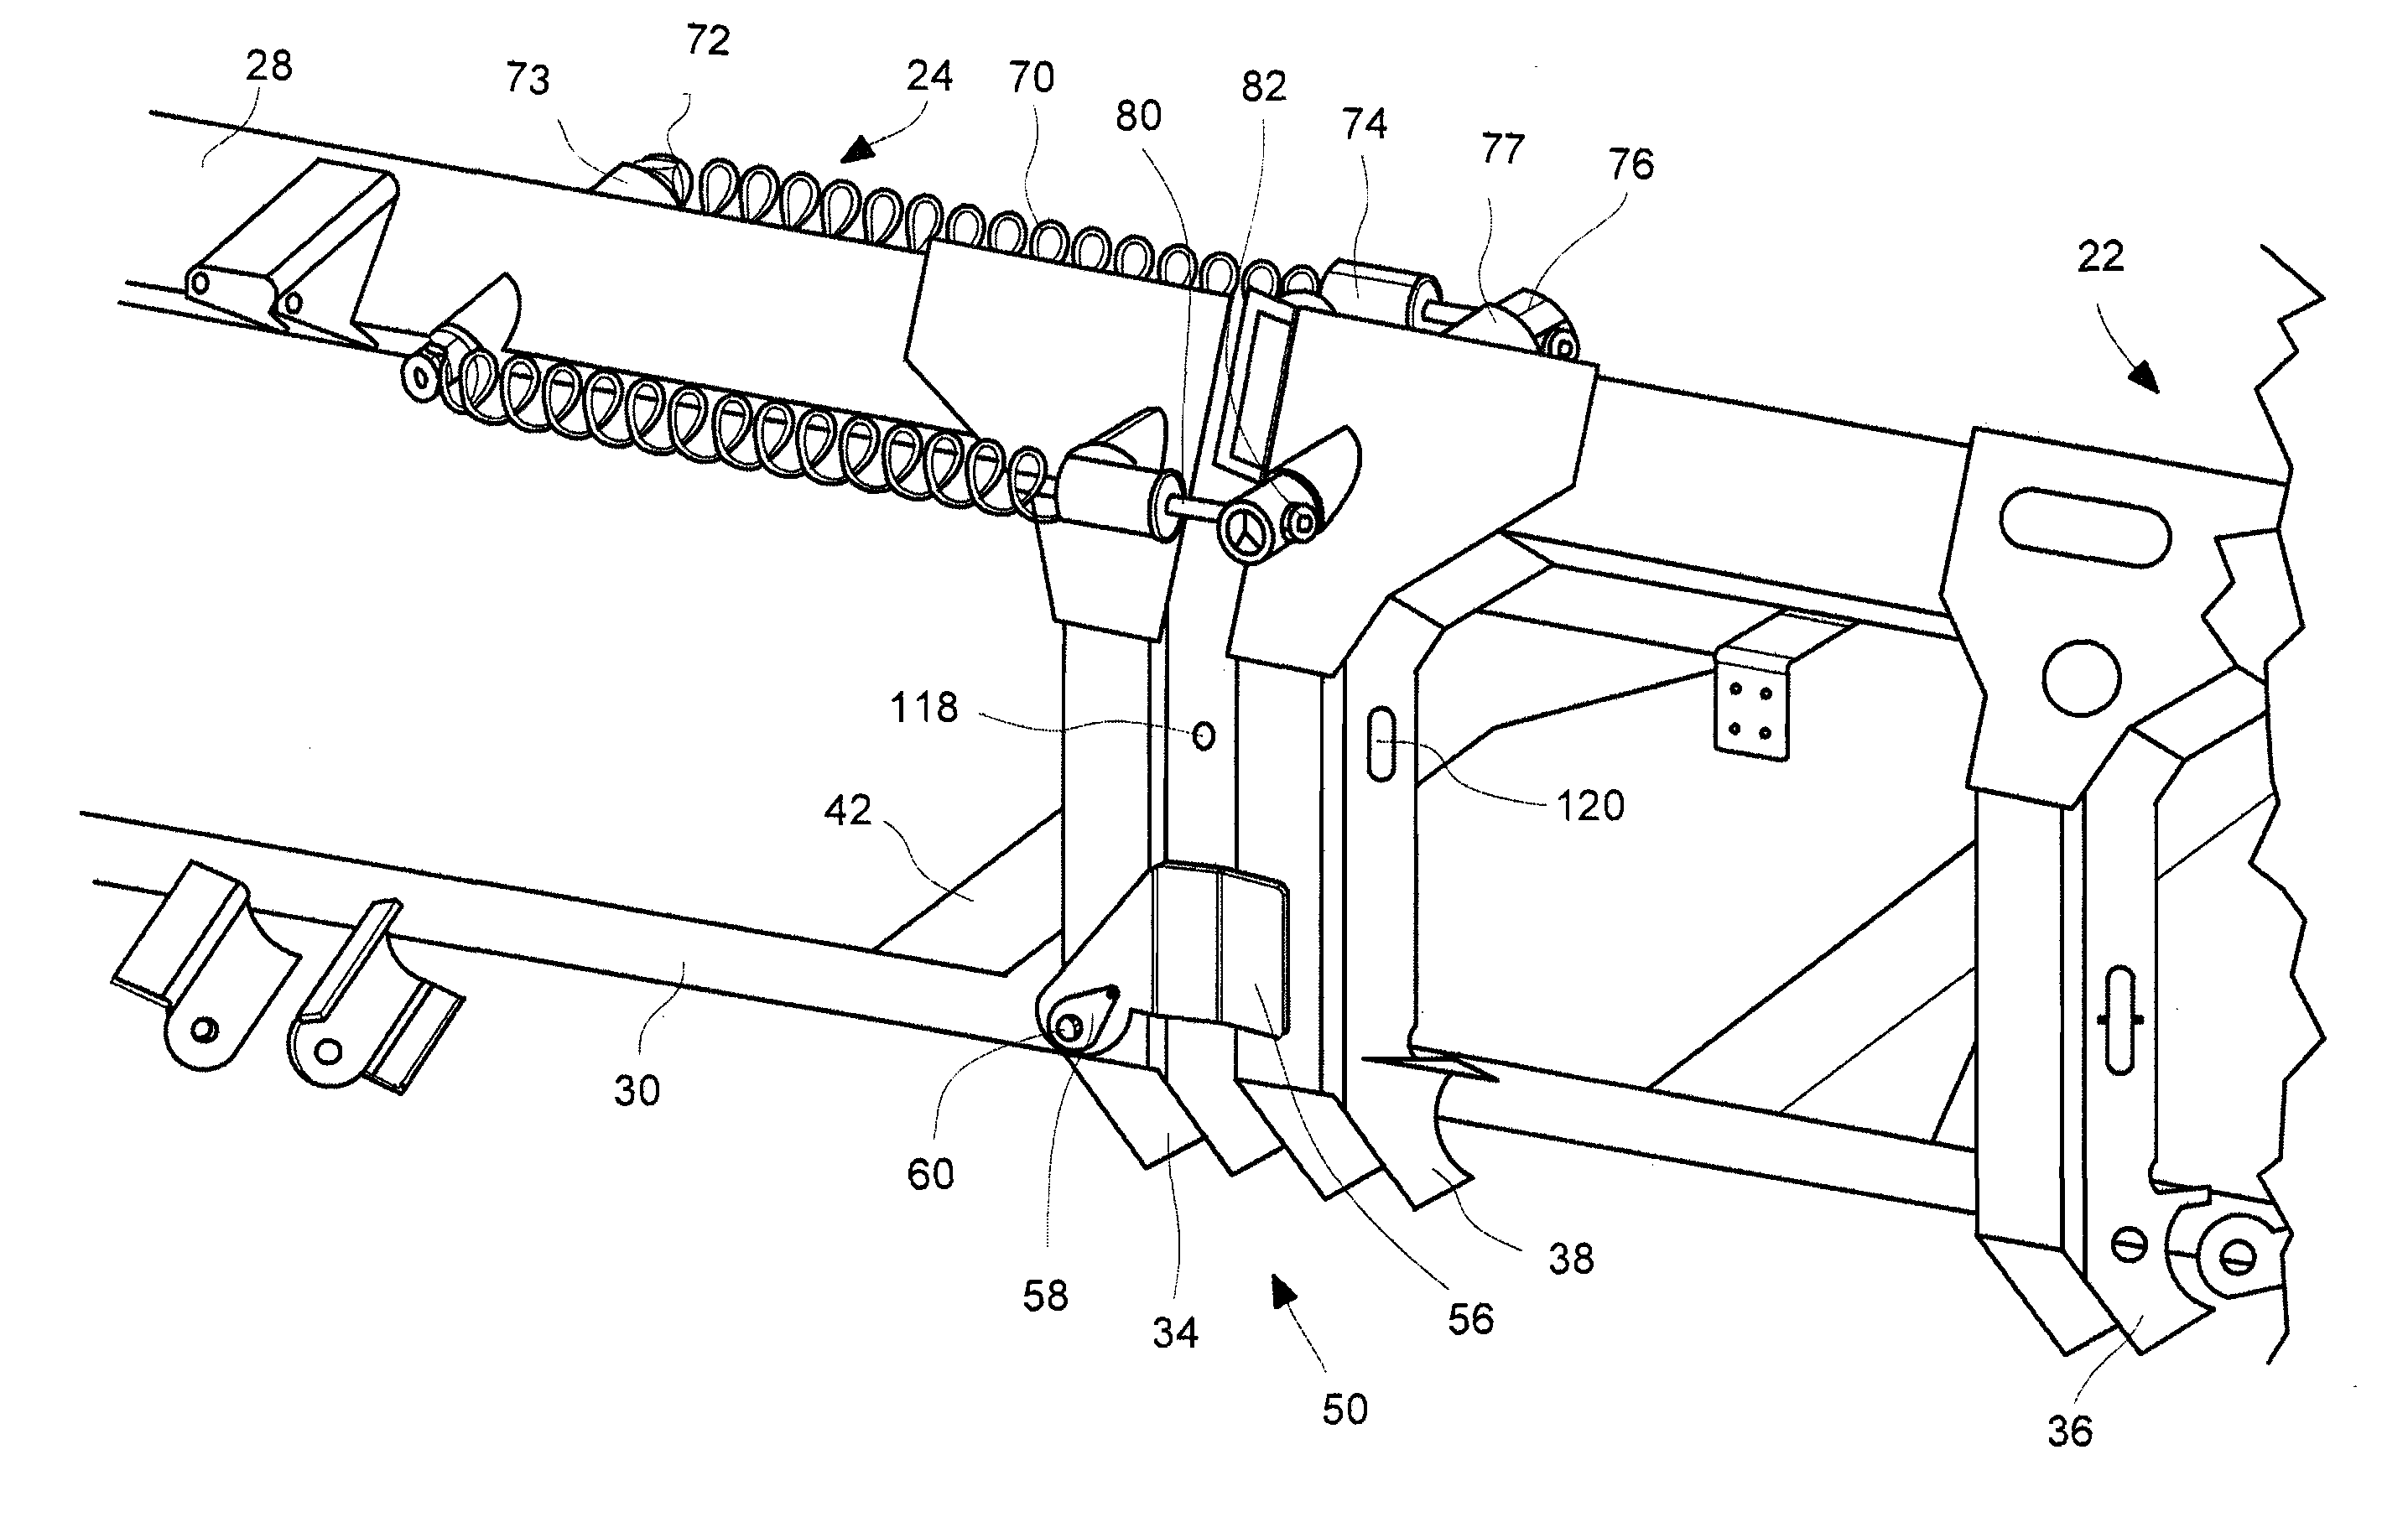 Winged header apparatus and method for a combine